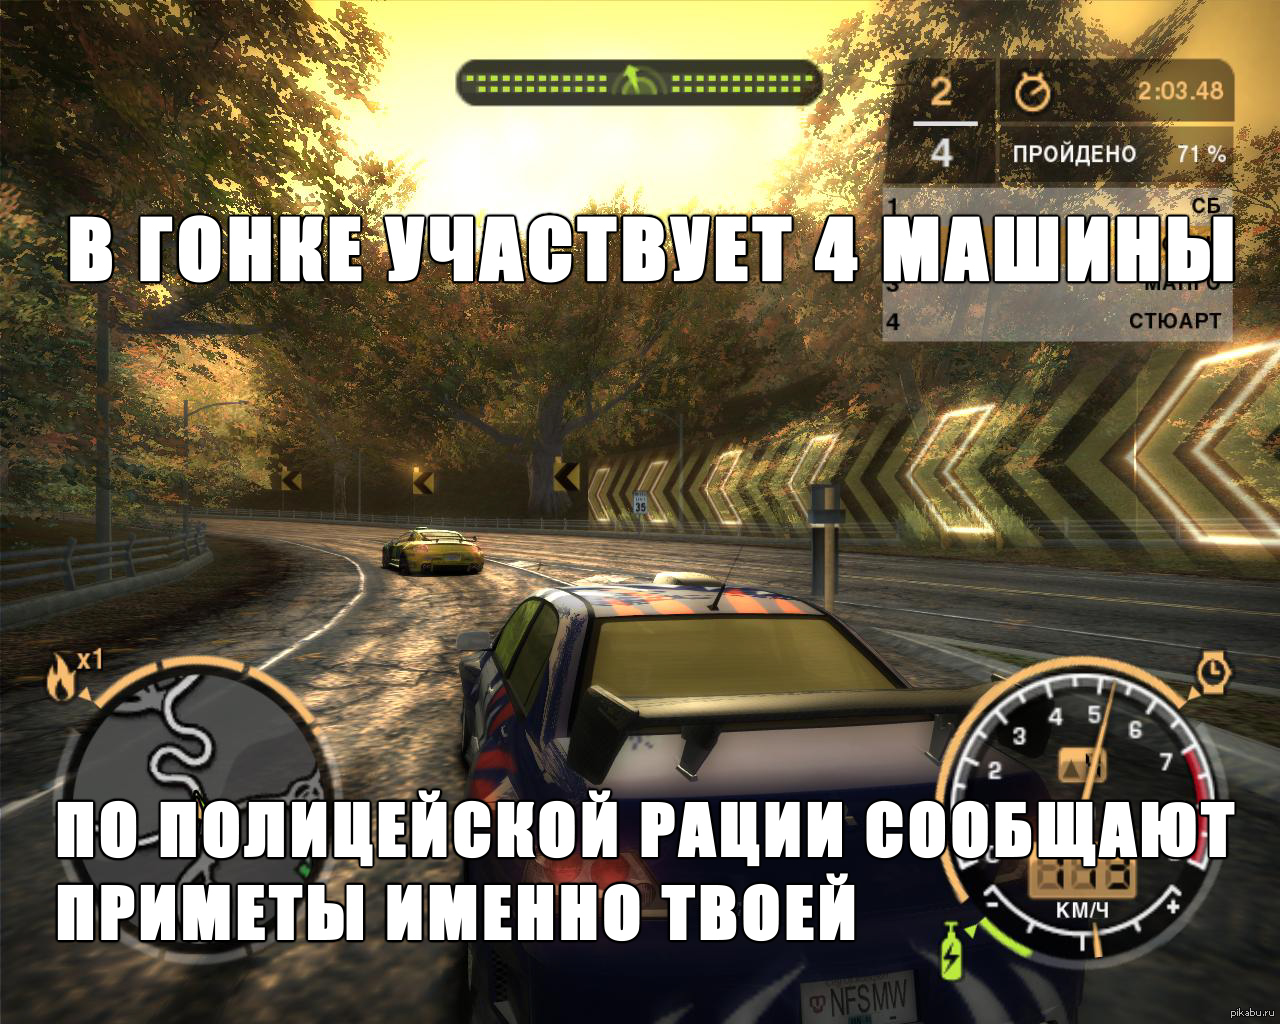 Пр гонять. NFS most wanted мемы. Need for Speed most wanted приколы. Приколы про нфс. Мемы про нид фор СПИД.